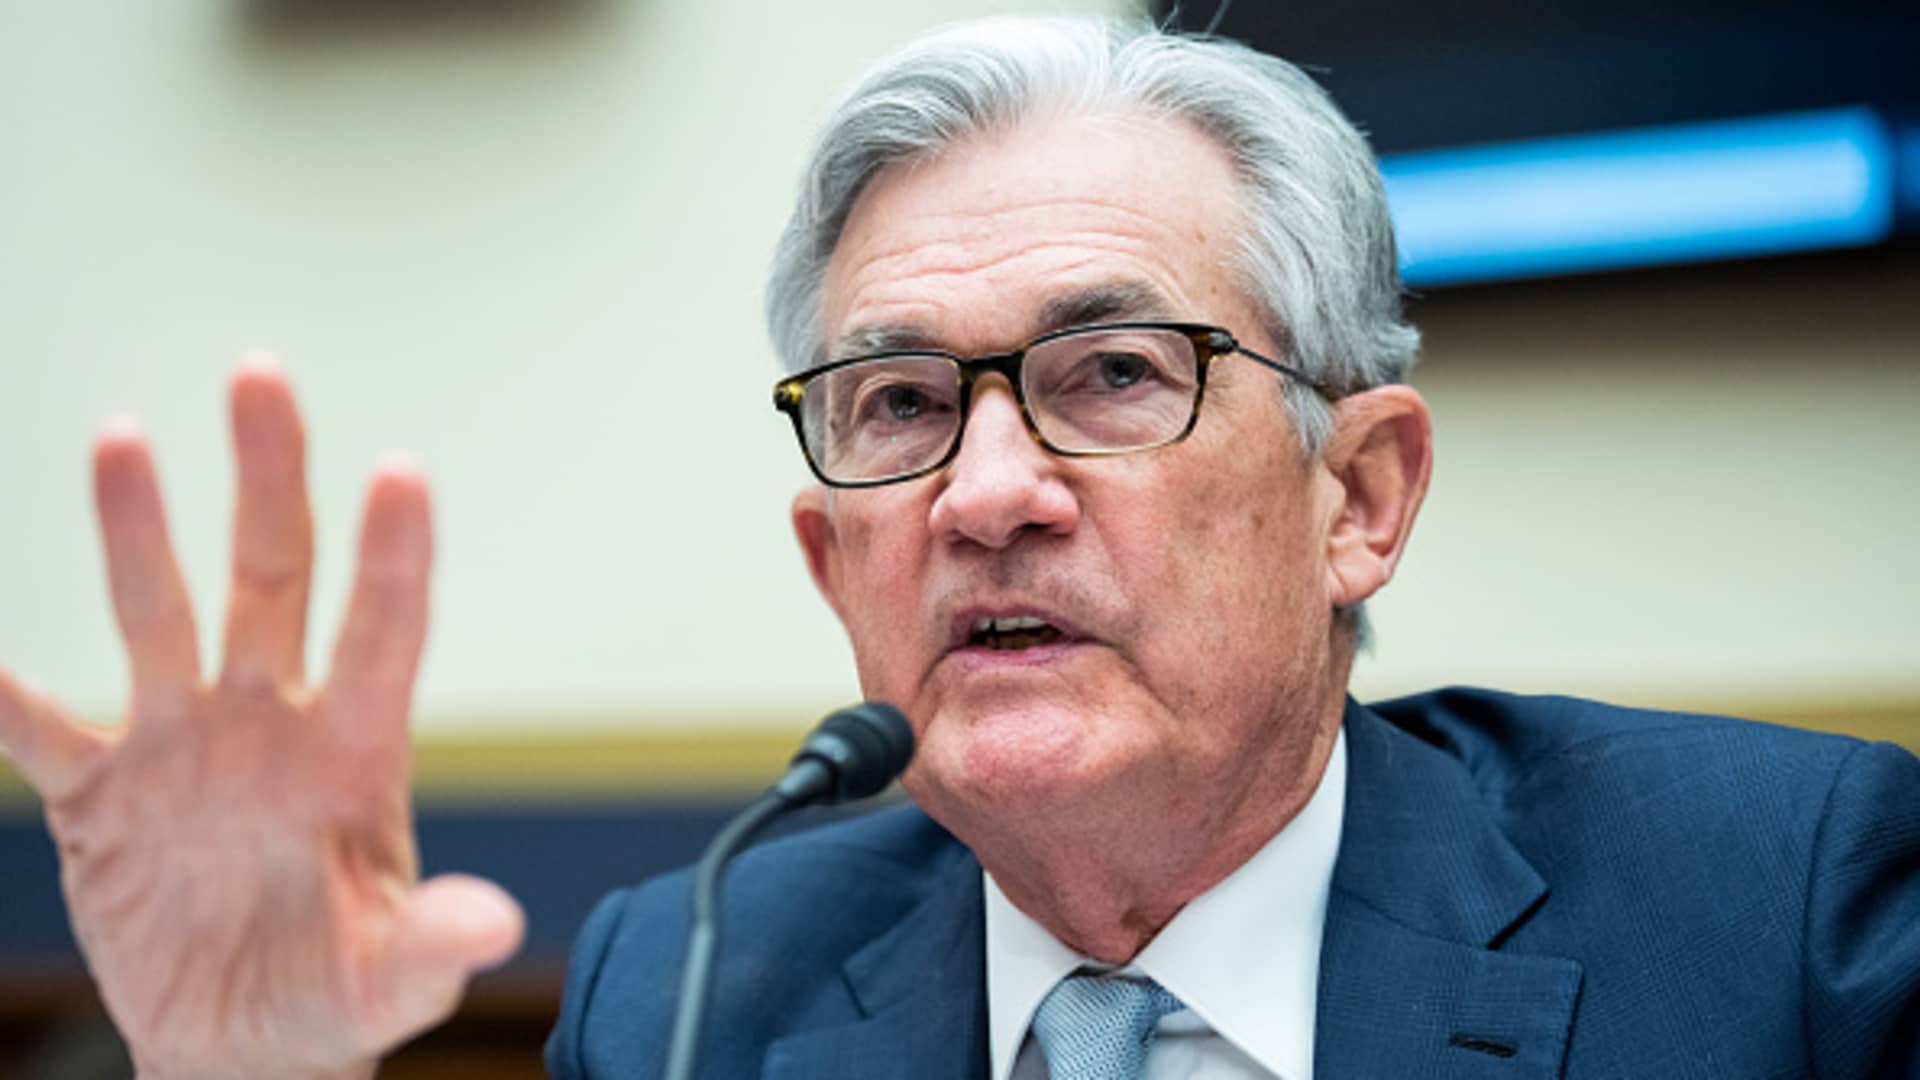 European markets trade lower after Fed’s Powell signals a rate hike next month – CNBC